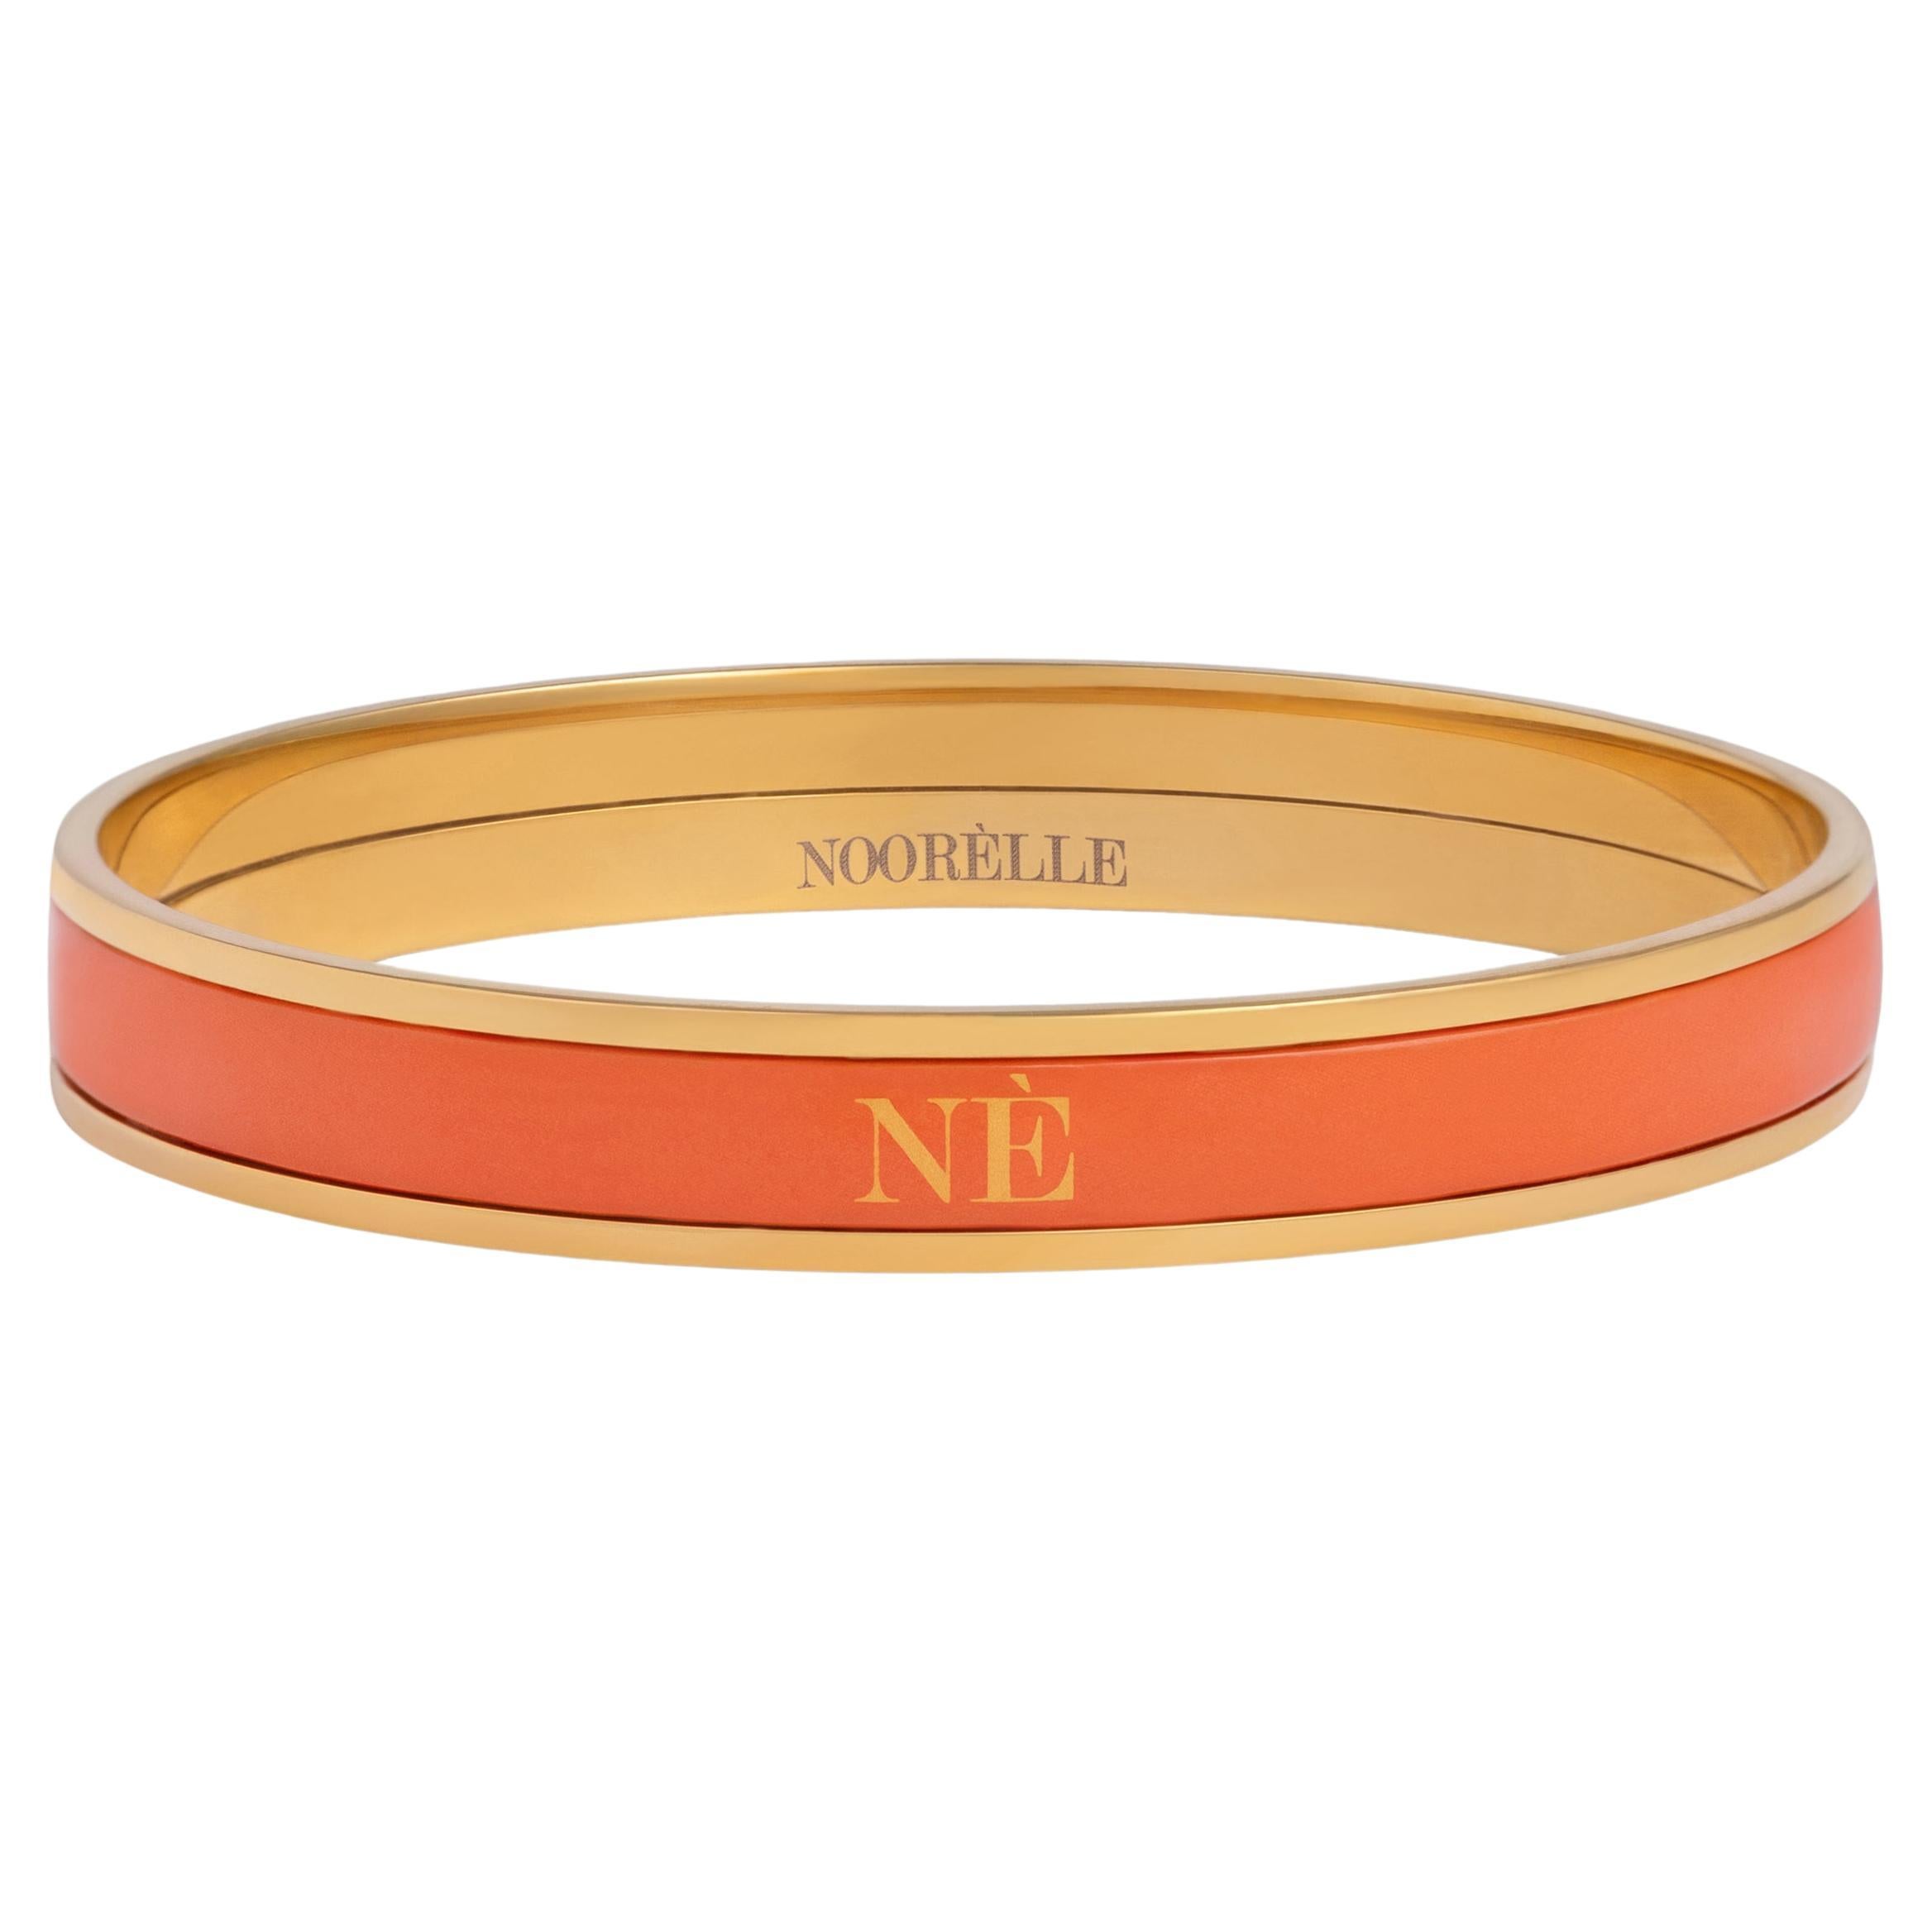 Gold Plated Stainless Steel Bangle, Orange Hand Painted Fire Enamel w. Monogram